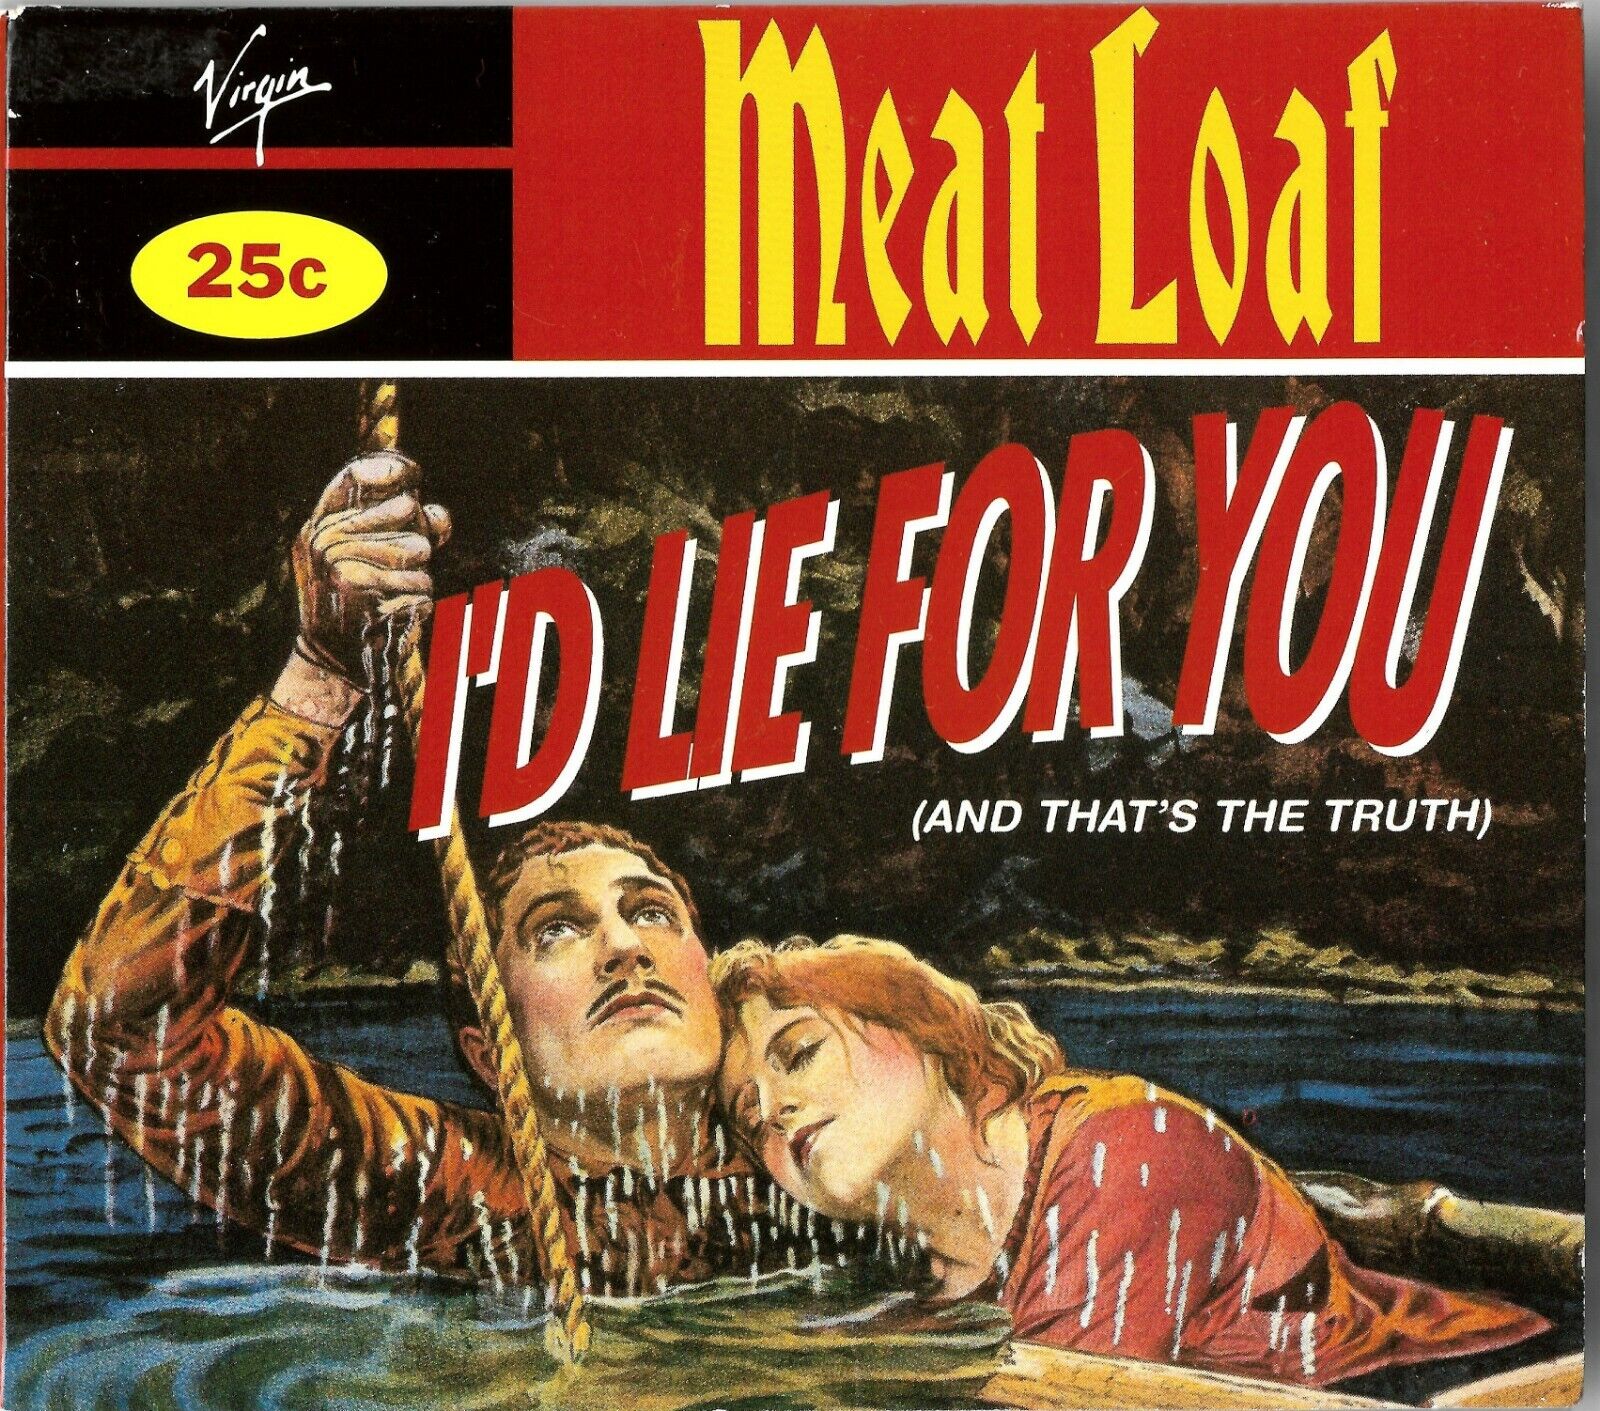 MEATLOAF - I'D LIE FOR YOU (AND THAT'S THE TRUTH) 1995 UK CD SINGLE VSCDG 1563